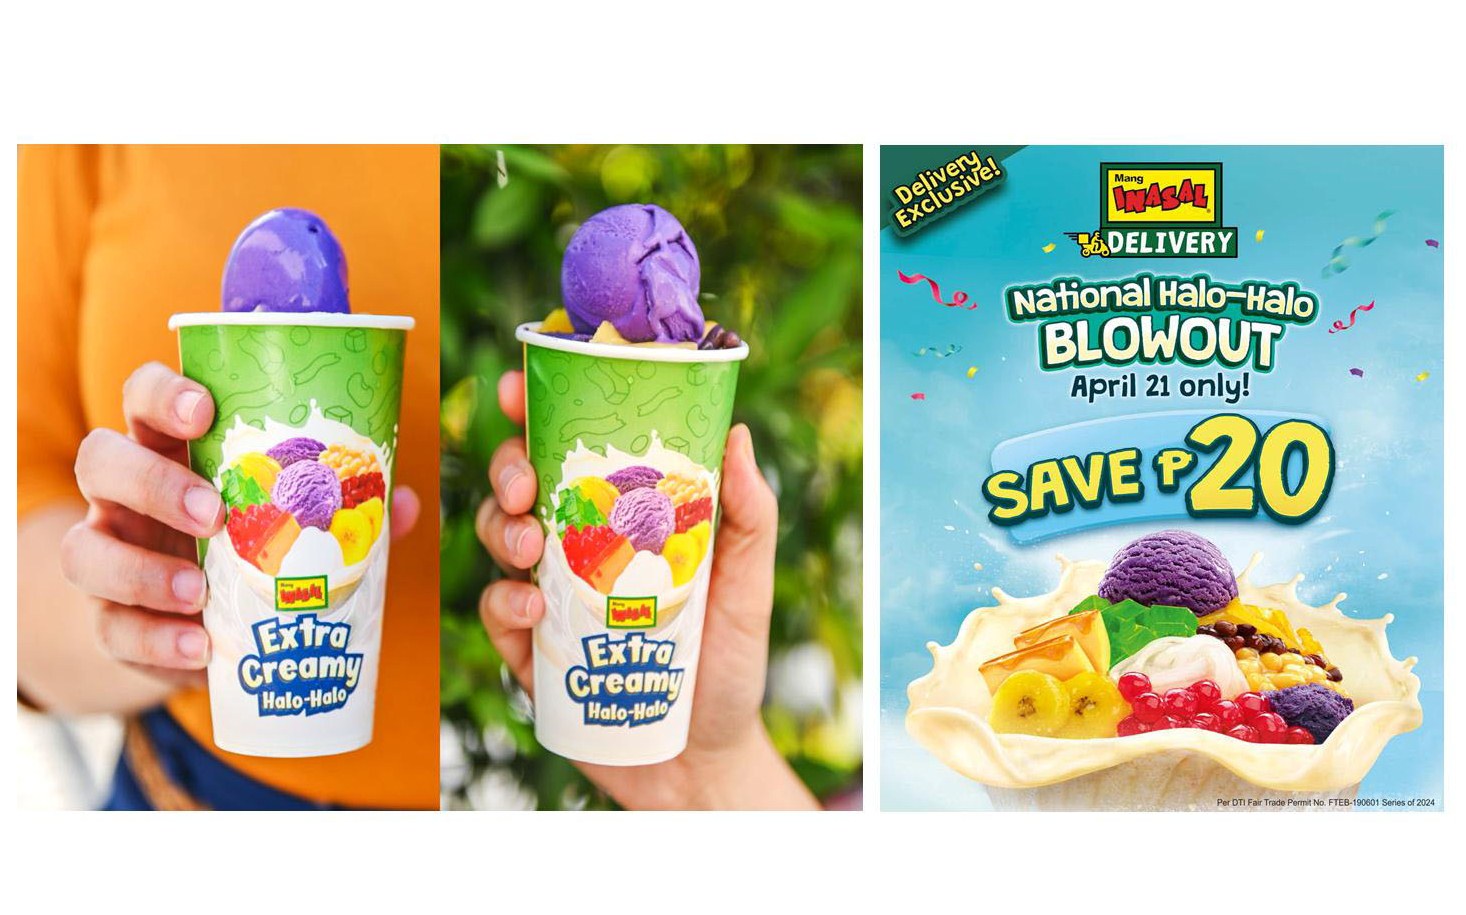 This Sunday is Mang Inasal’s National Halo-Halo Blowout Delivery Exclusive